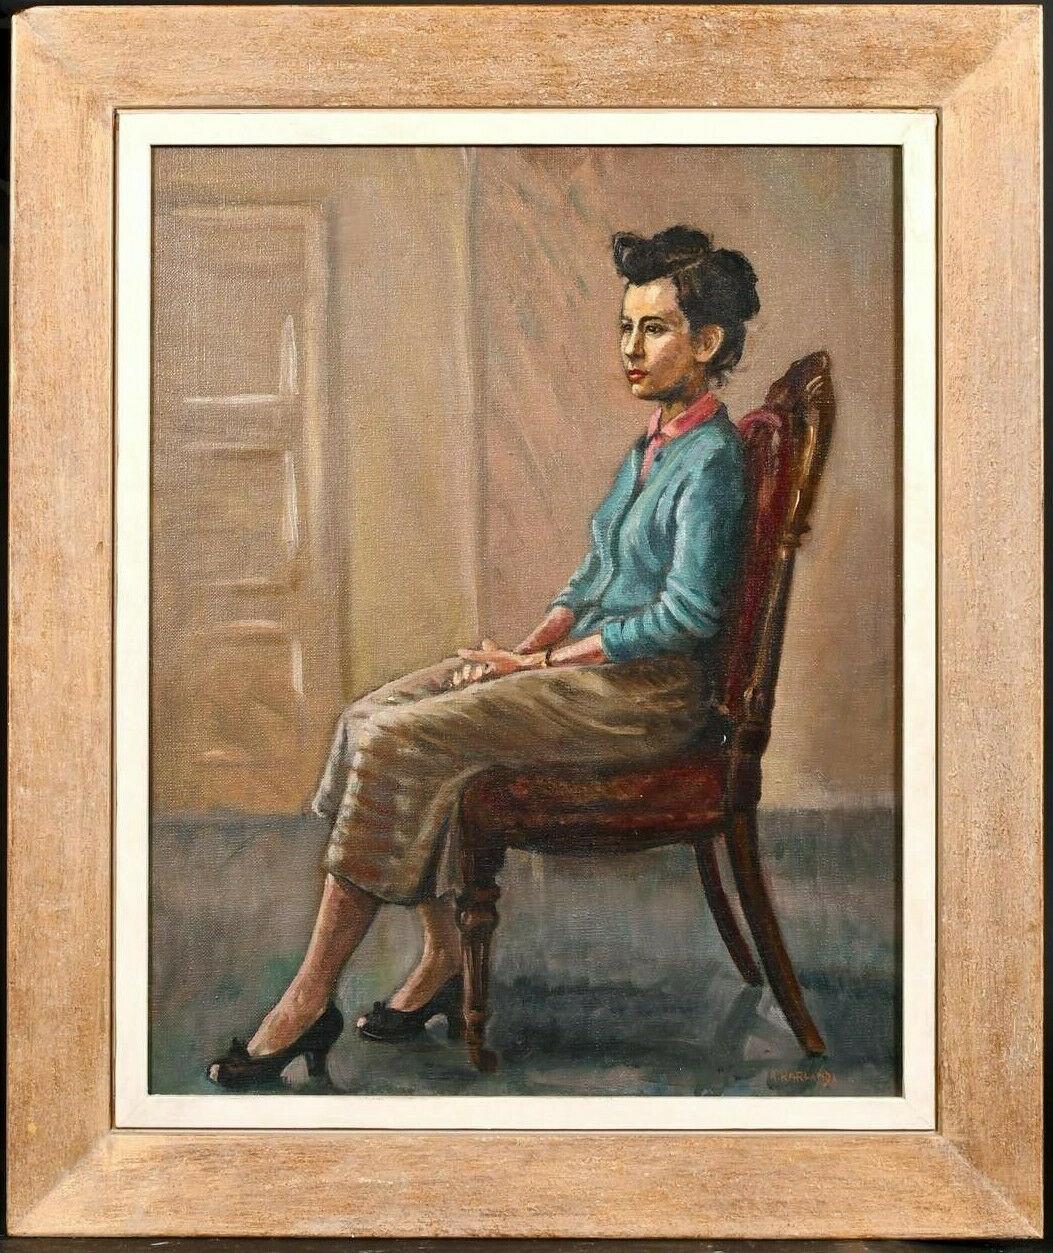 c.1960's ENGLISH OIL - PORTRAIT DER PERIOD LADY SEATED IN InterIOR - SIGNED